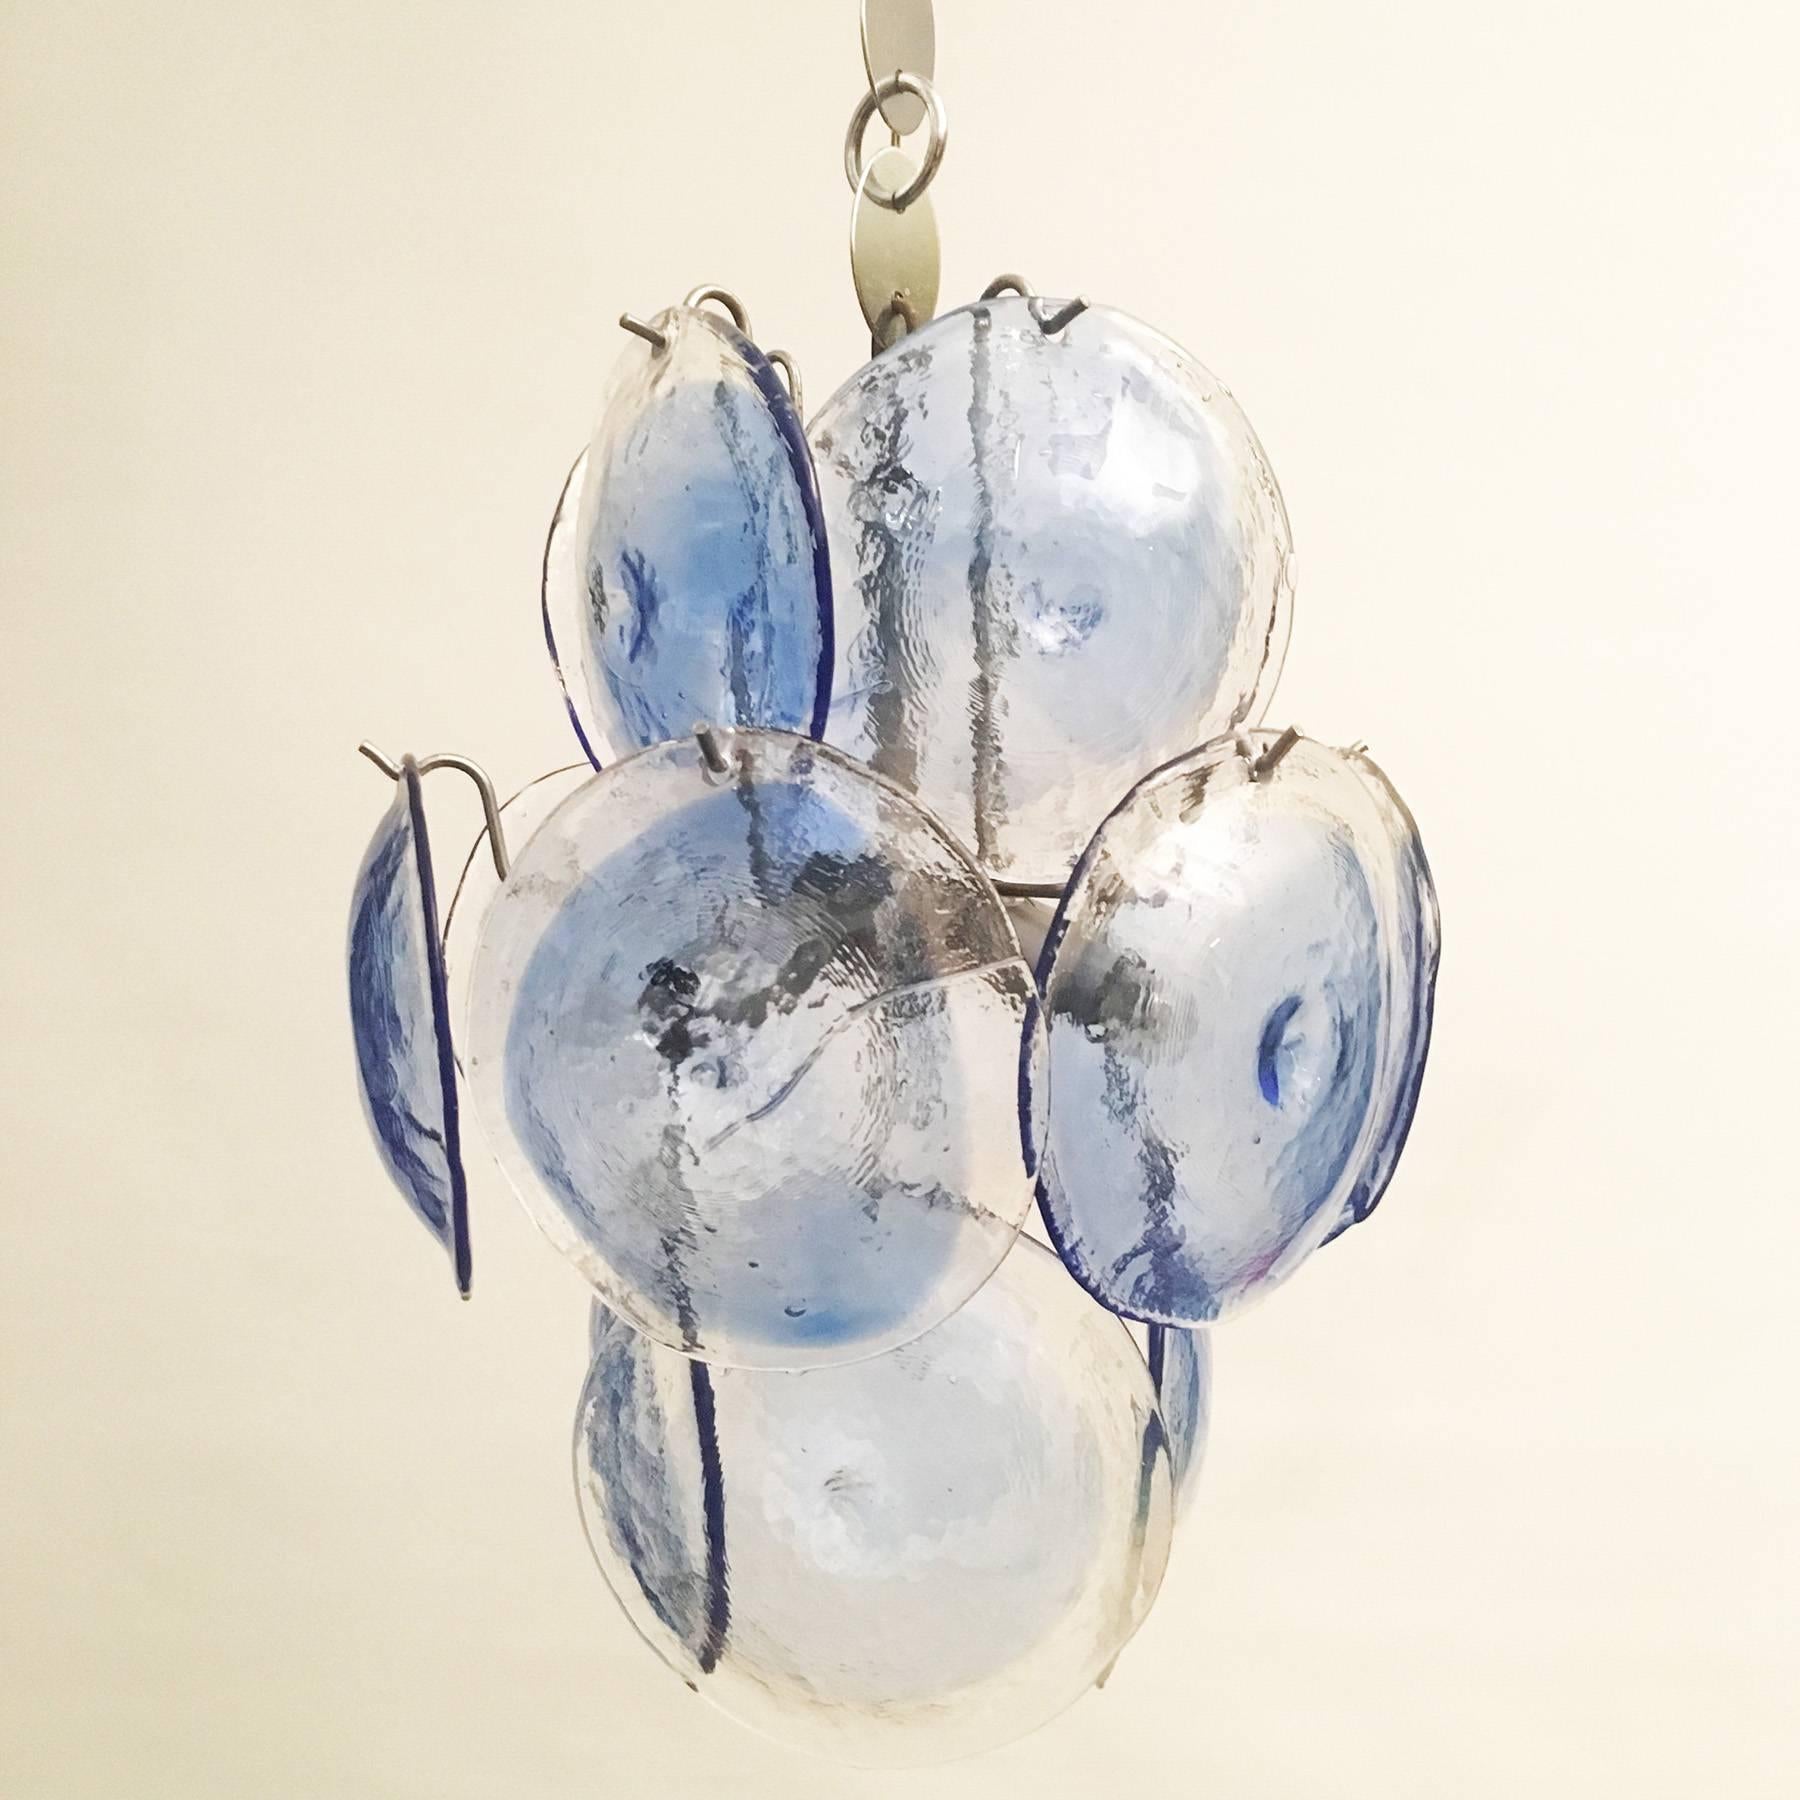 Beautiful small chandelier, designed in the 1970s by Gino Vistosi, manufactured by Vistosi Murano.
The chandelier is made of a nickel and chrome-plated metal fixture and 14 handblown glass disks in clear and blue. It is equipped with four E14 lamp